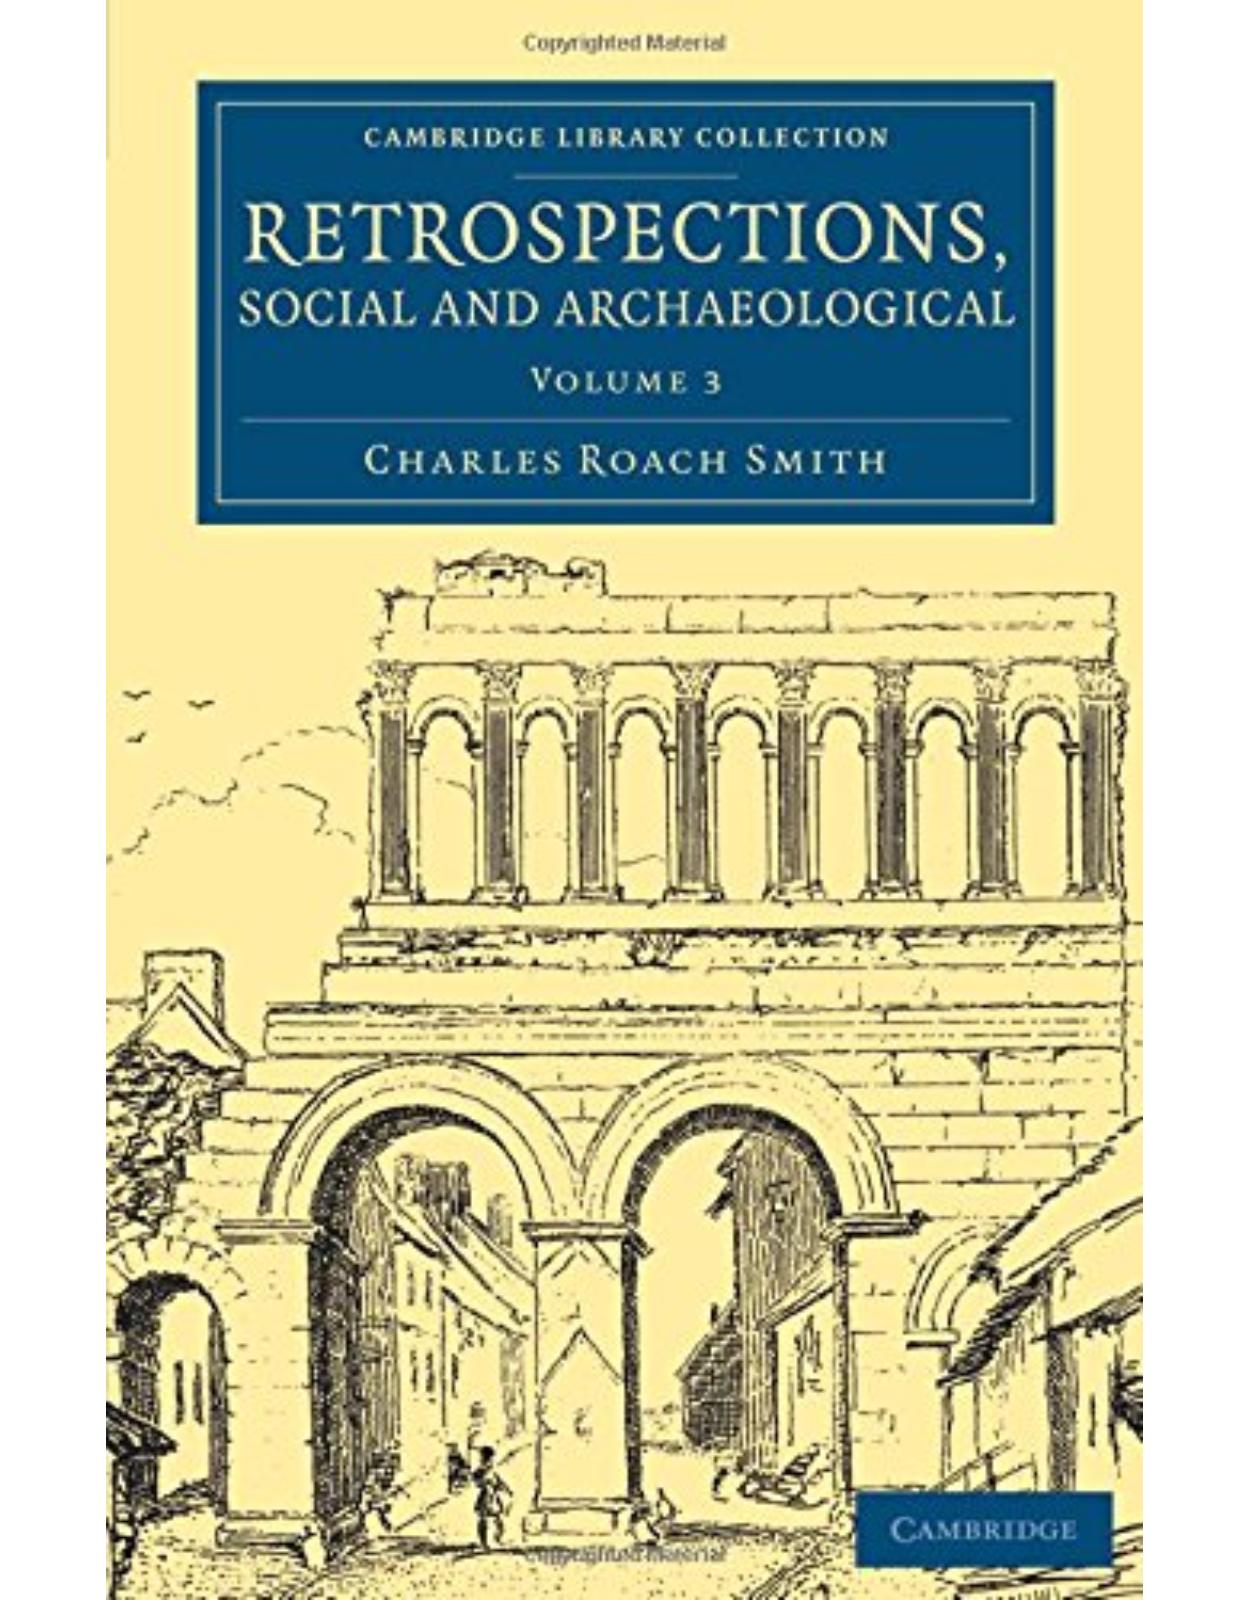 Retrospections, Social and Archaeological: Volume 3 (Cambridge Library Collection - Archaeology)